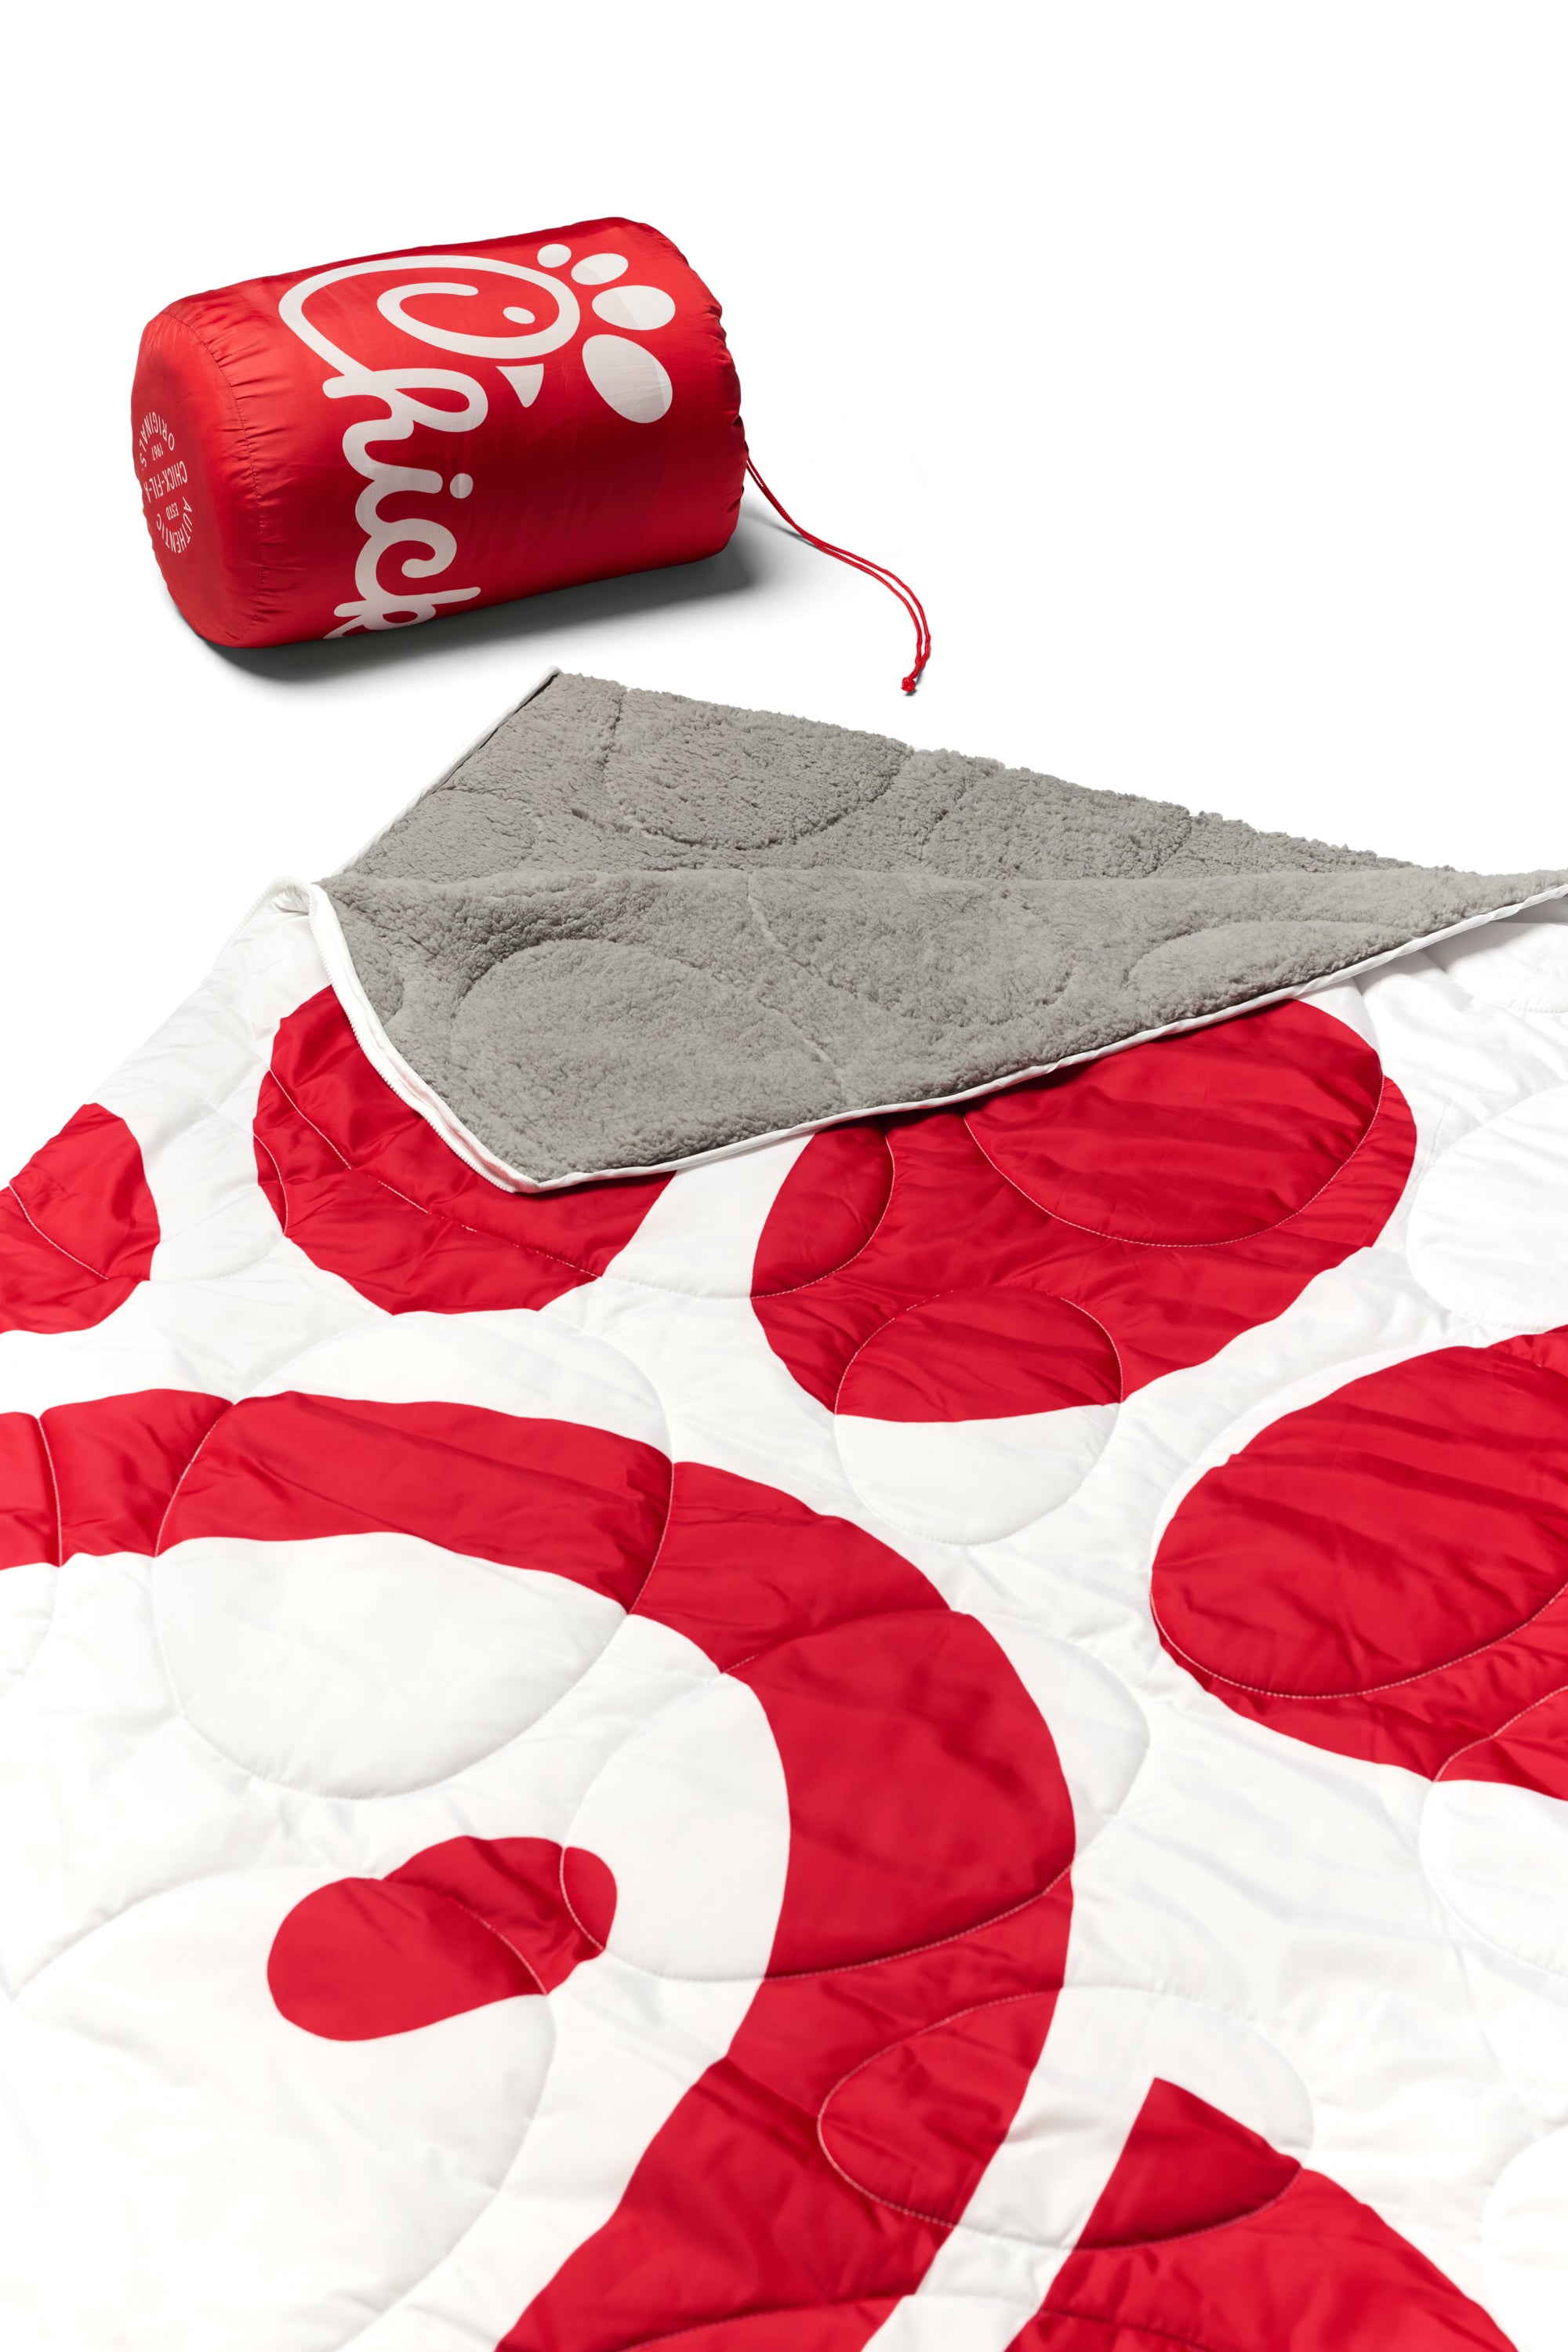 Chick-fil-A Sandwich Bag Indoor Sleeping Bag with the storage bag